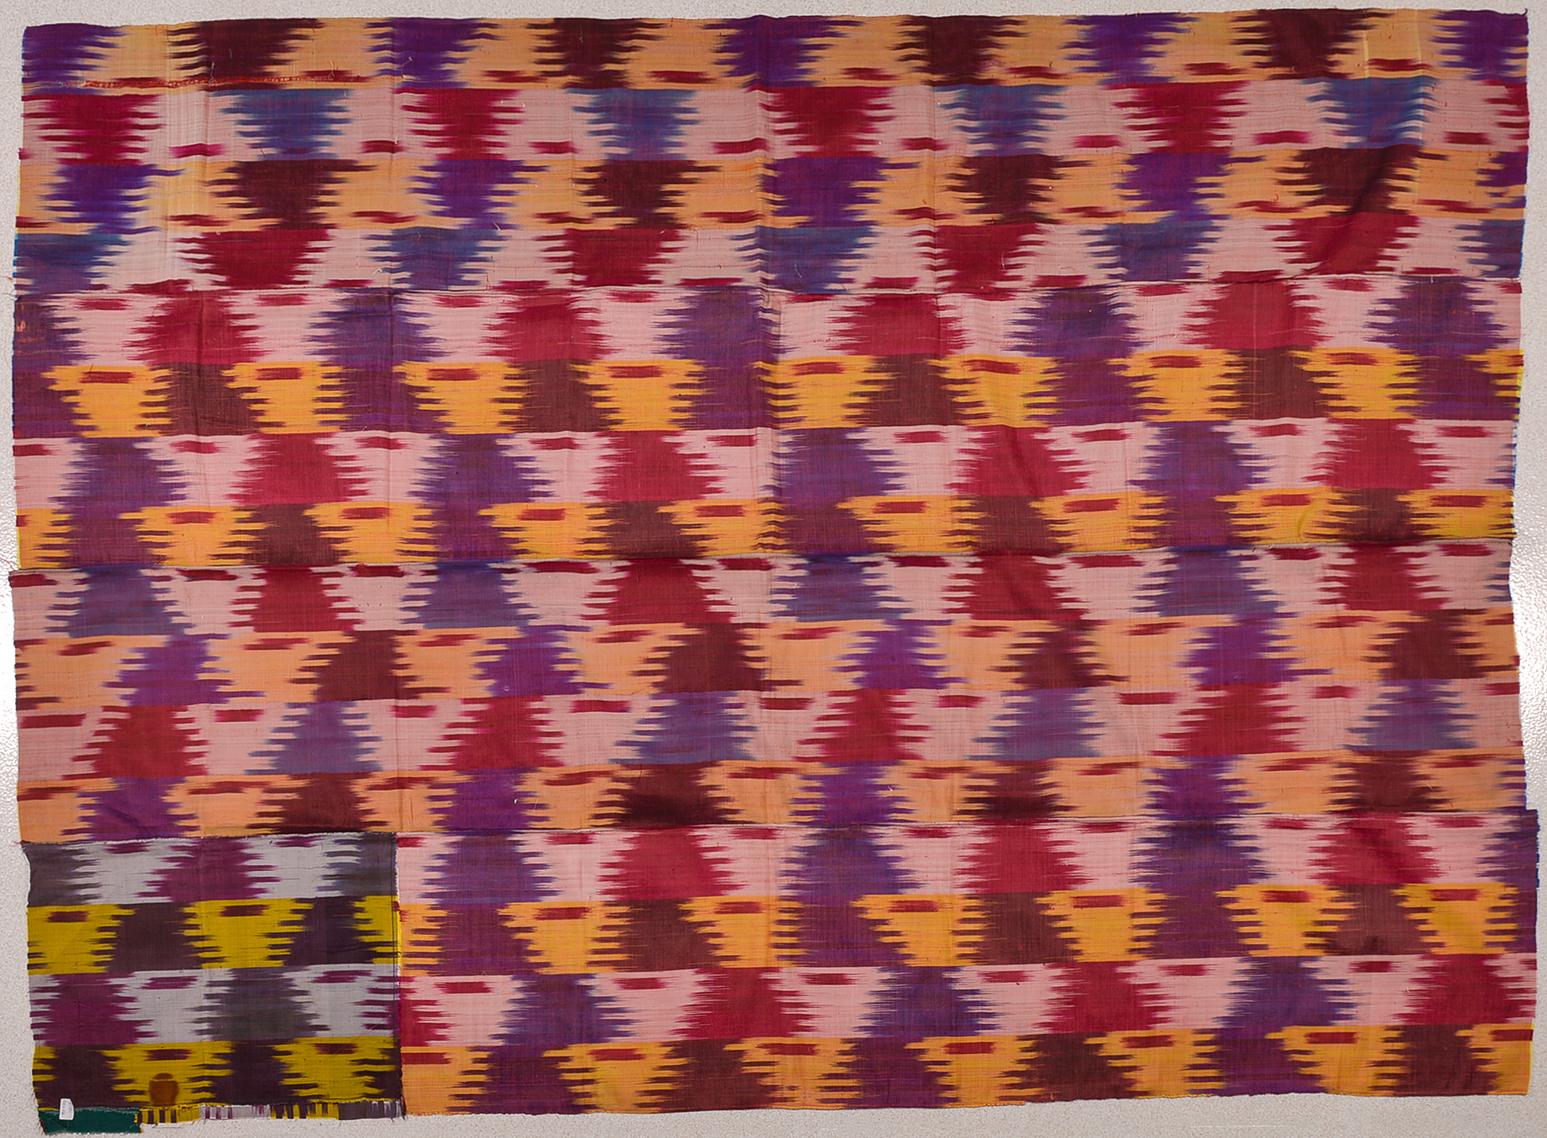 Olk Silk Uzbekistan Ikat, washed and ironed for sale - This item has TWO straight parts of fabric - 
 Beautiful tribal female workmanship, with bright and cheerful colors as per tradition -
B/276.
Special price because I want to close my activities.